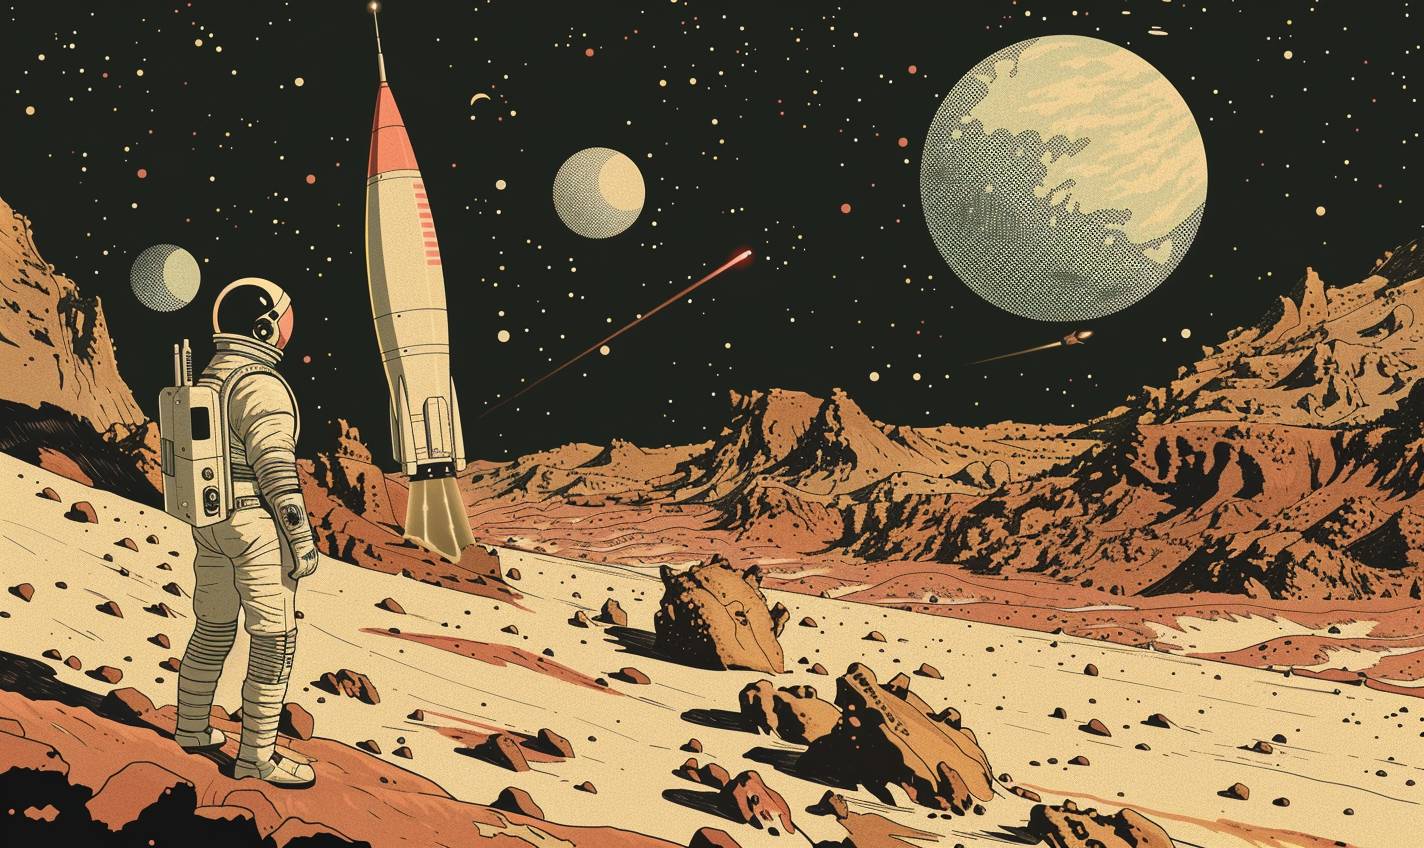 In the style of Adrian Tomine, a space explorer discovers a new galaxy